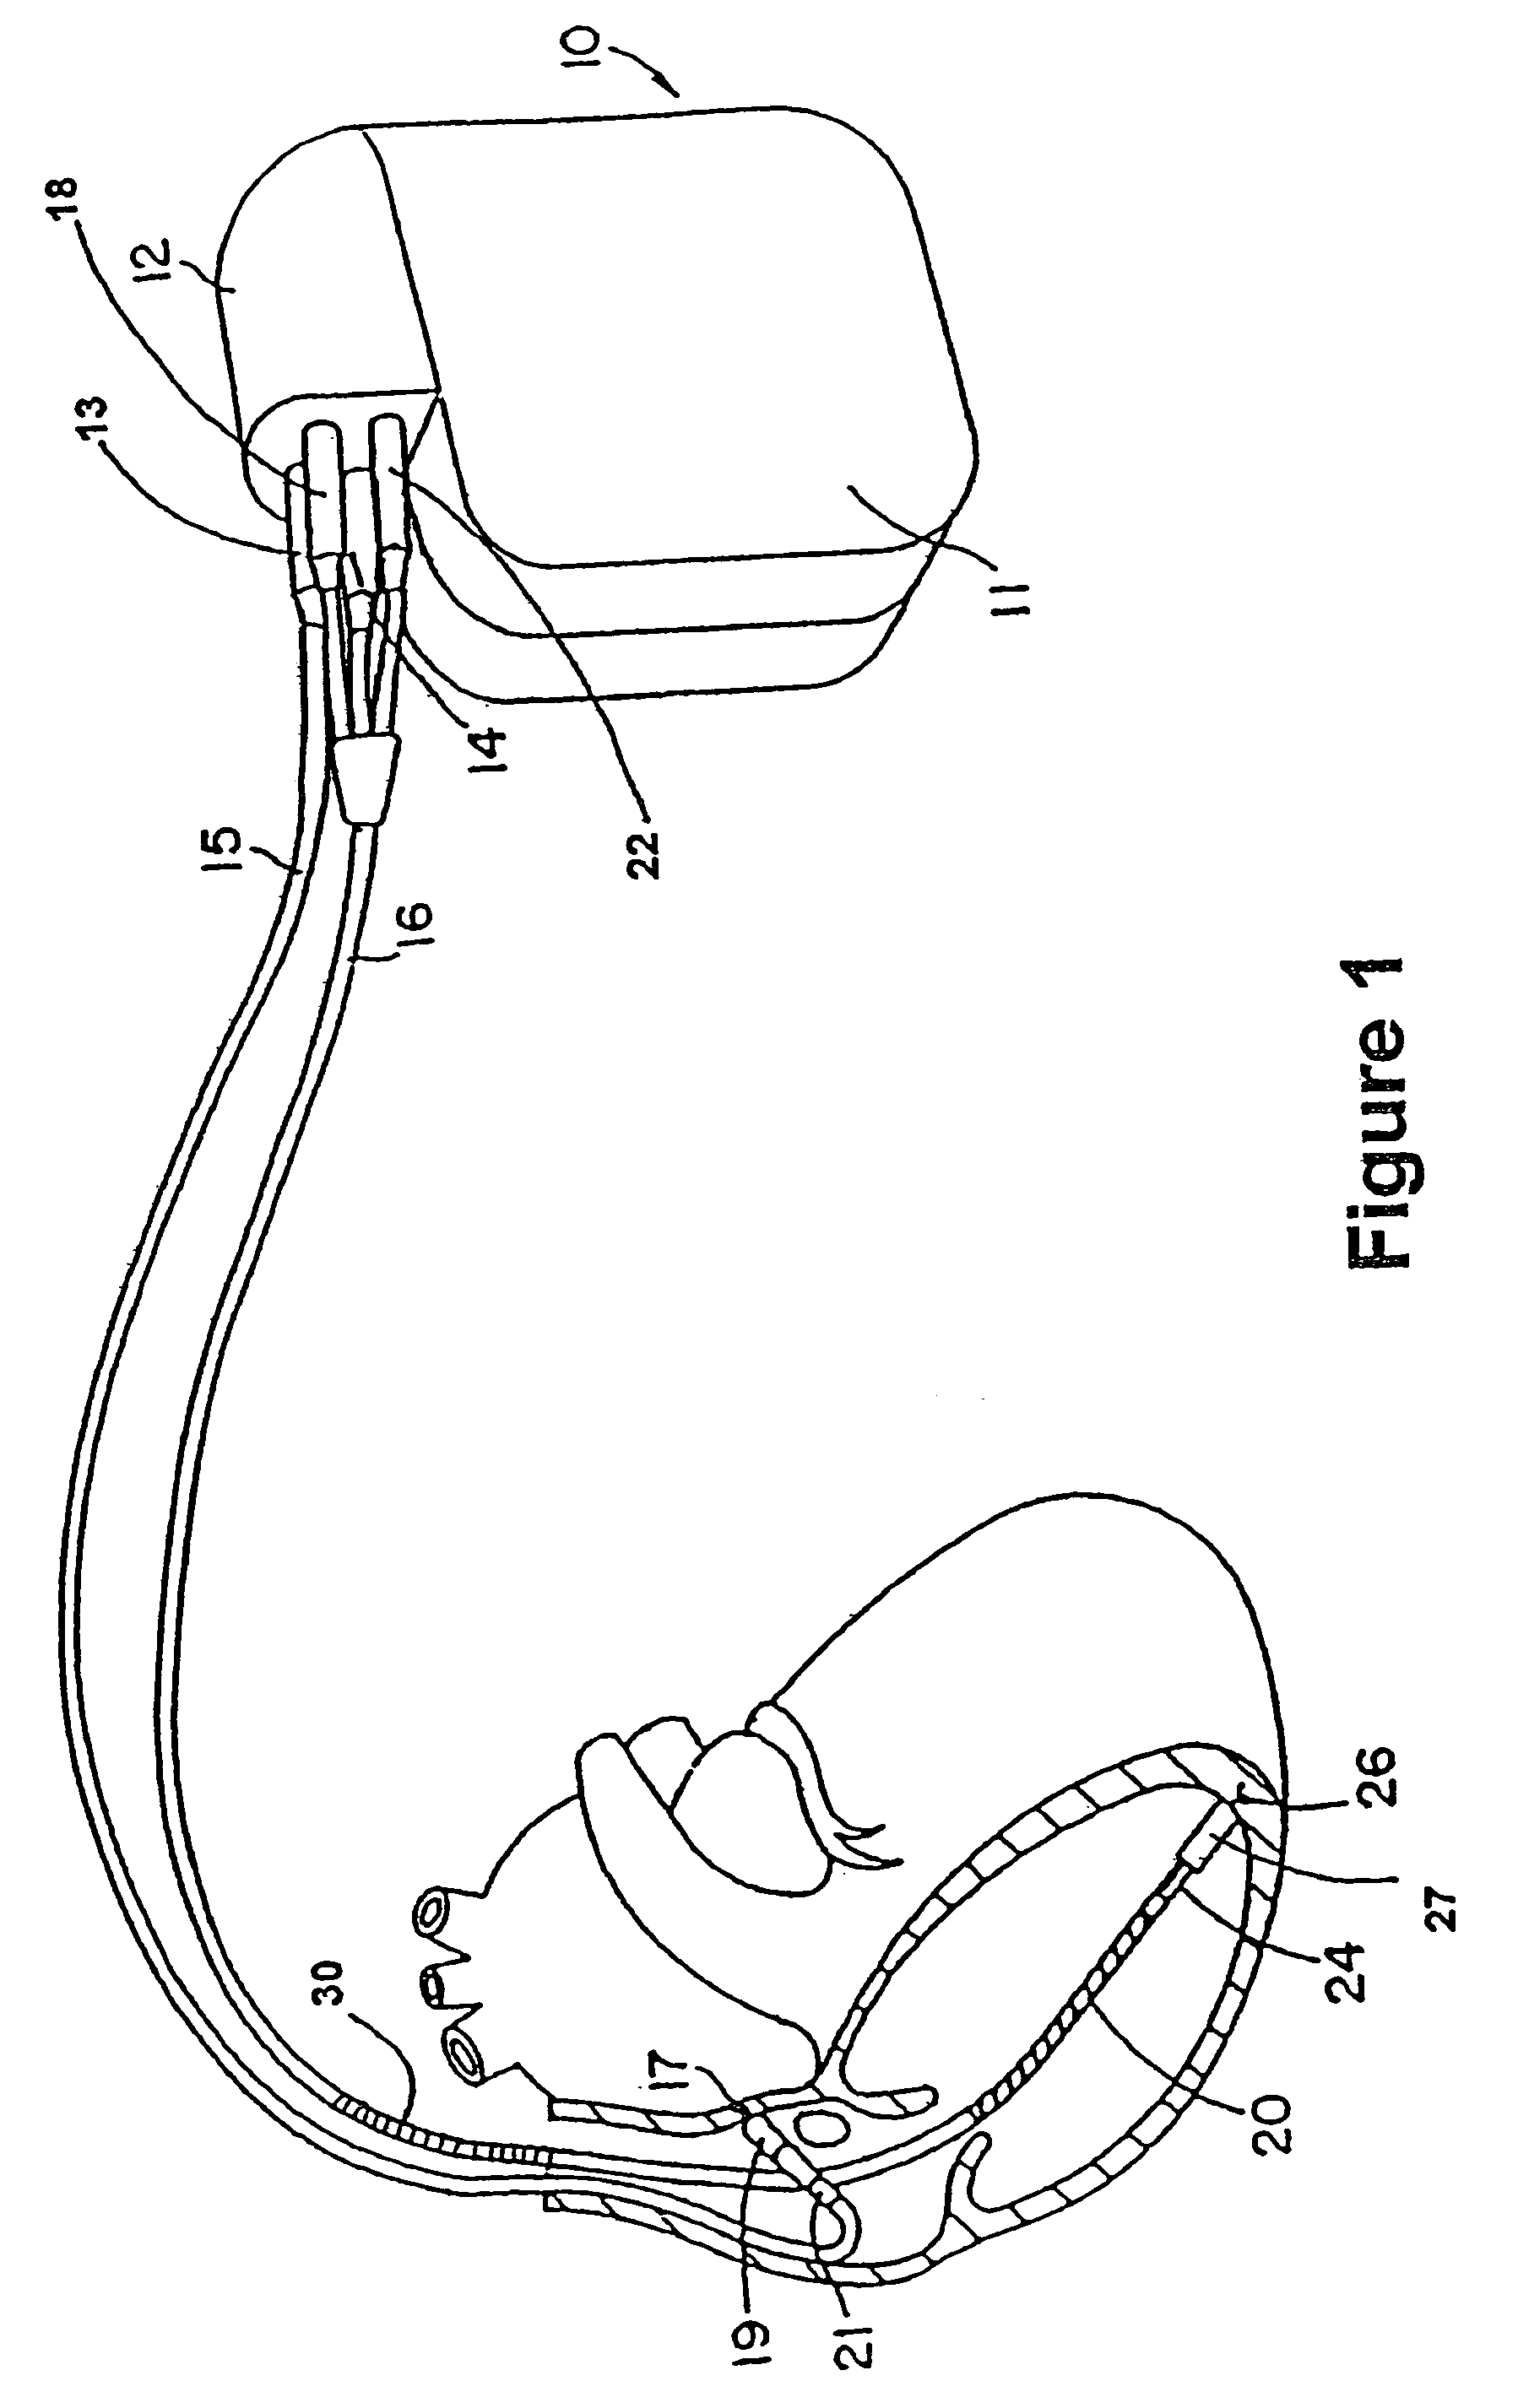 Implantable medical device with sleep disordered breathing monitoring